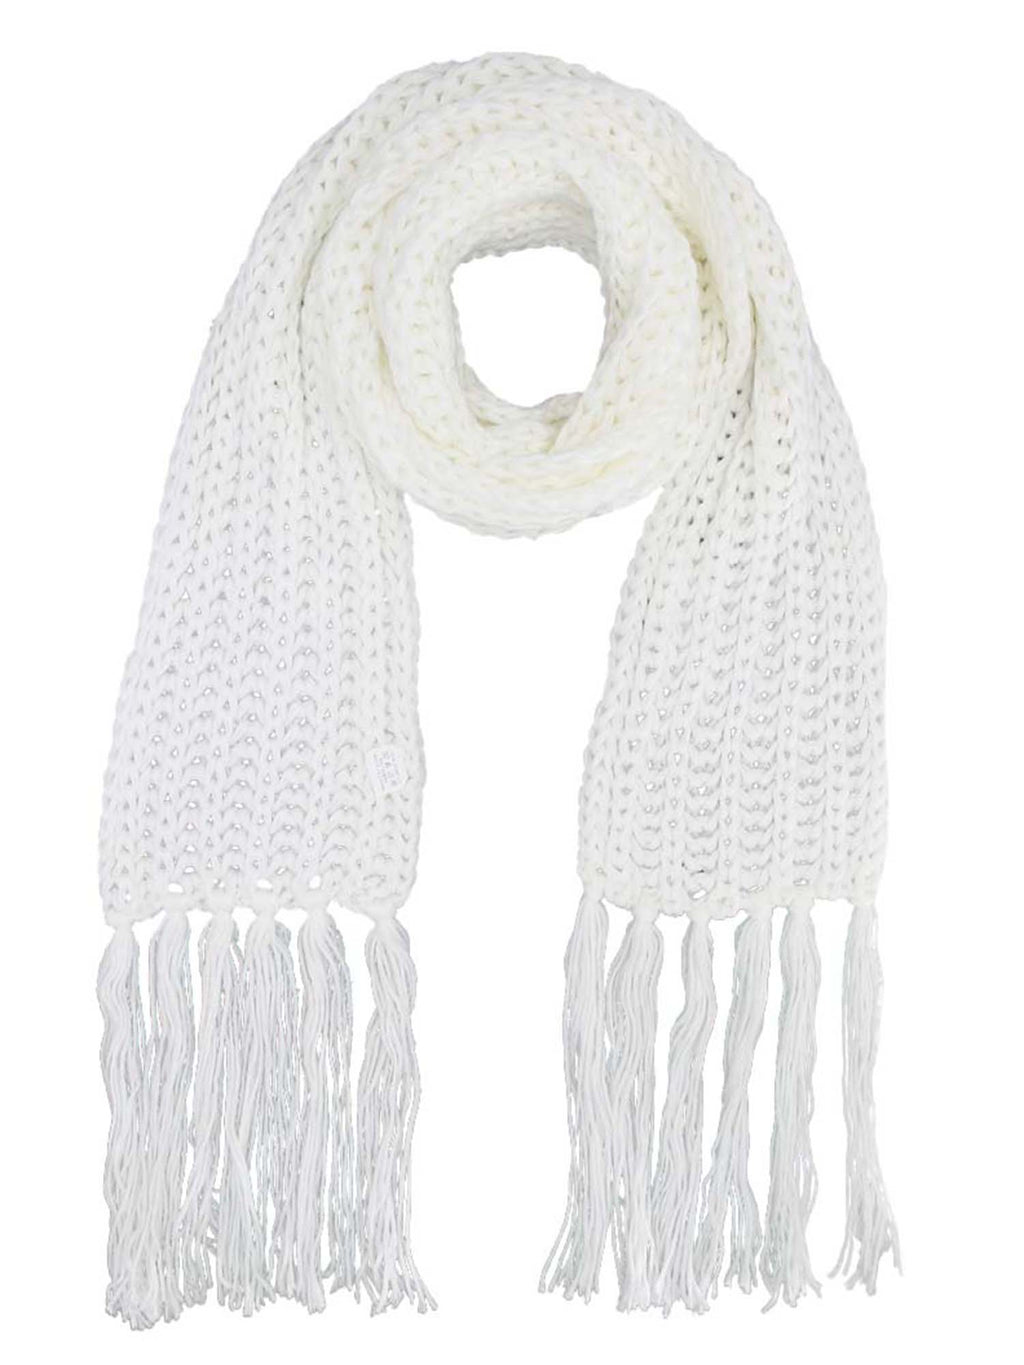 Thick Knit Long Winter Scarf With Fringe